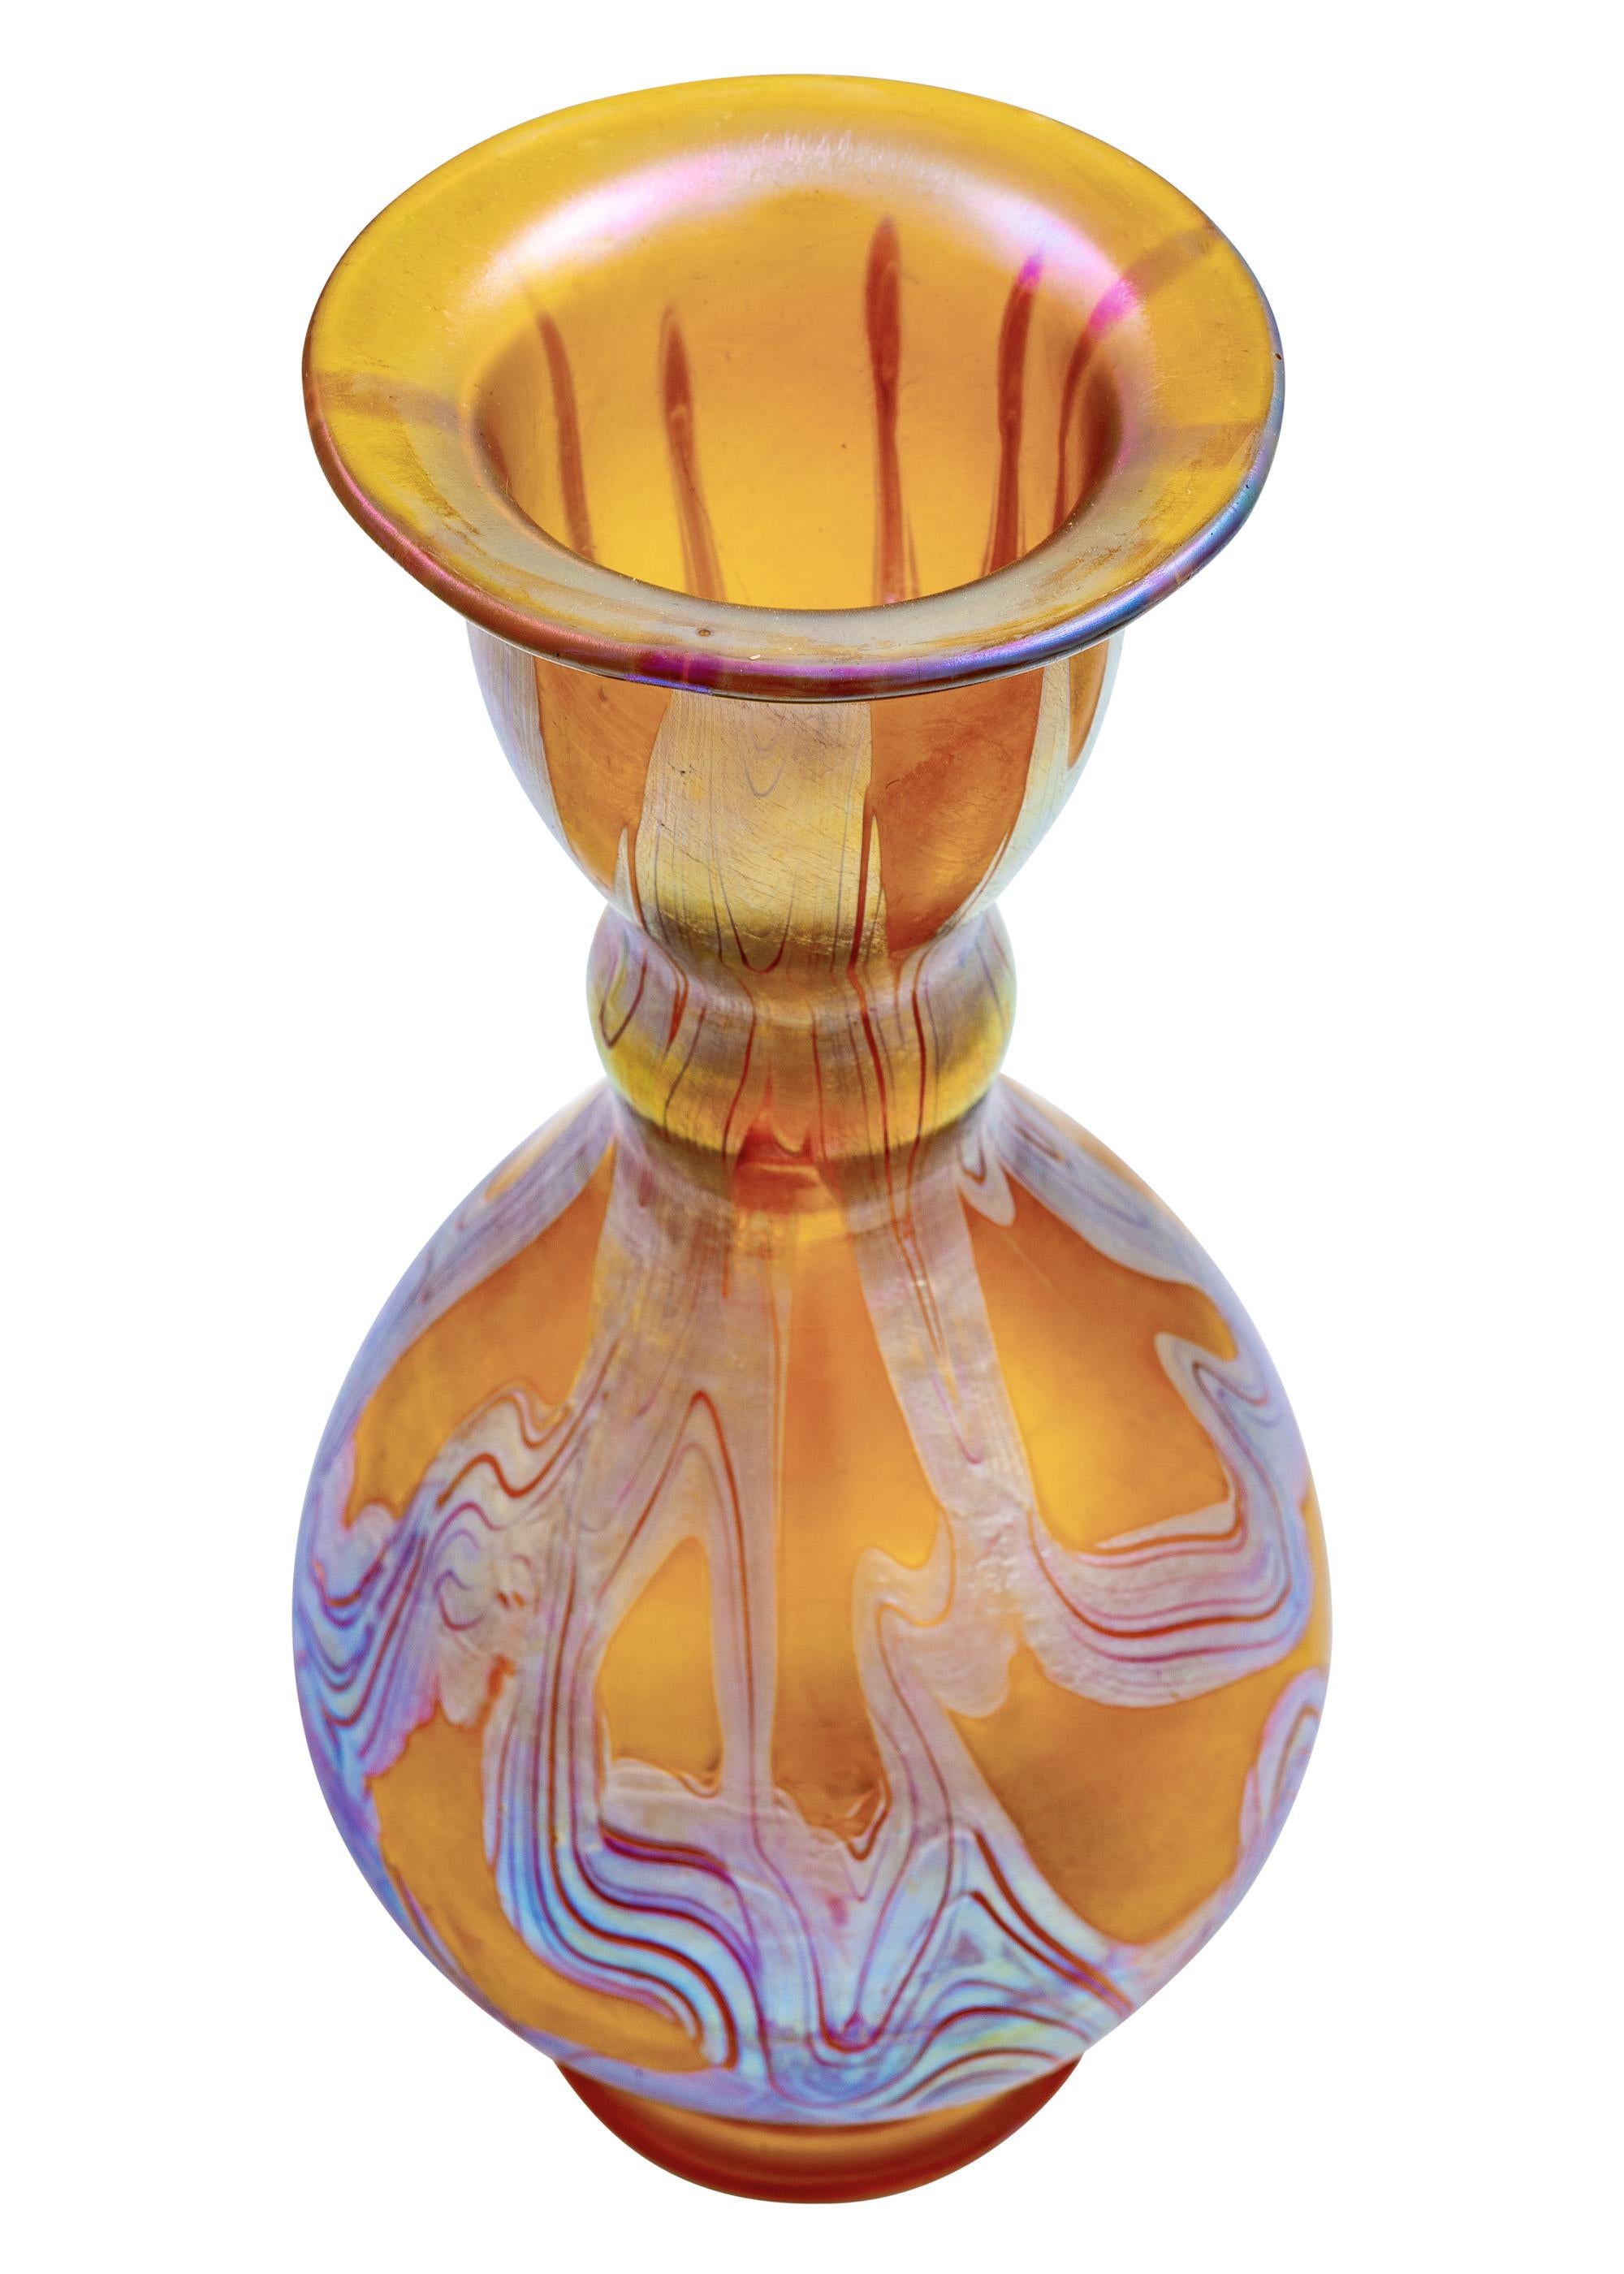 Austrian Jugendstil by Johann Loetz Witwe mouth-blown glass vase circa 1899 decor Candia Phenomen Genre 7773 signed

In the 1890s the Loetz company tried to break with the convention of the regional glass production and started reinventing itself.